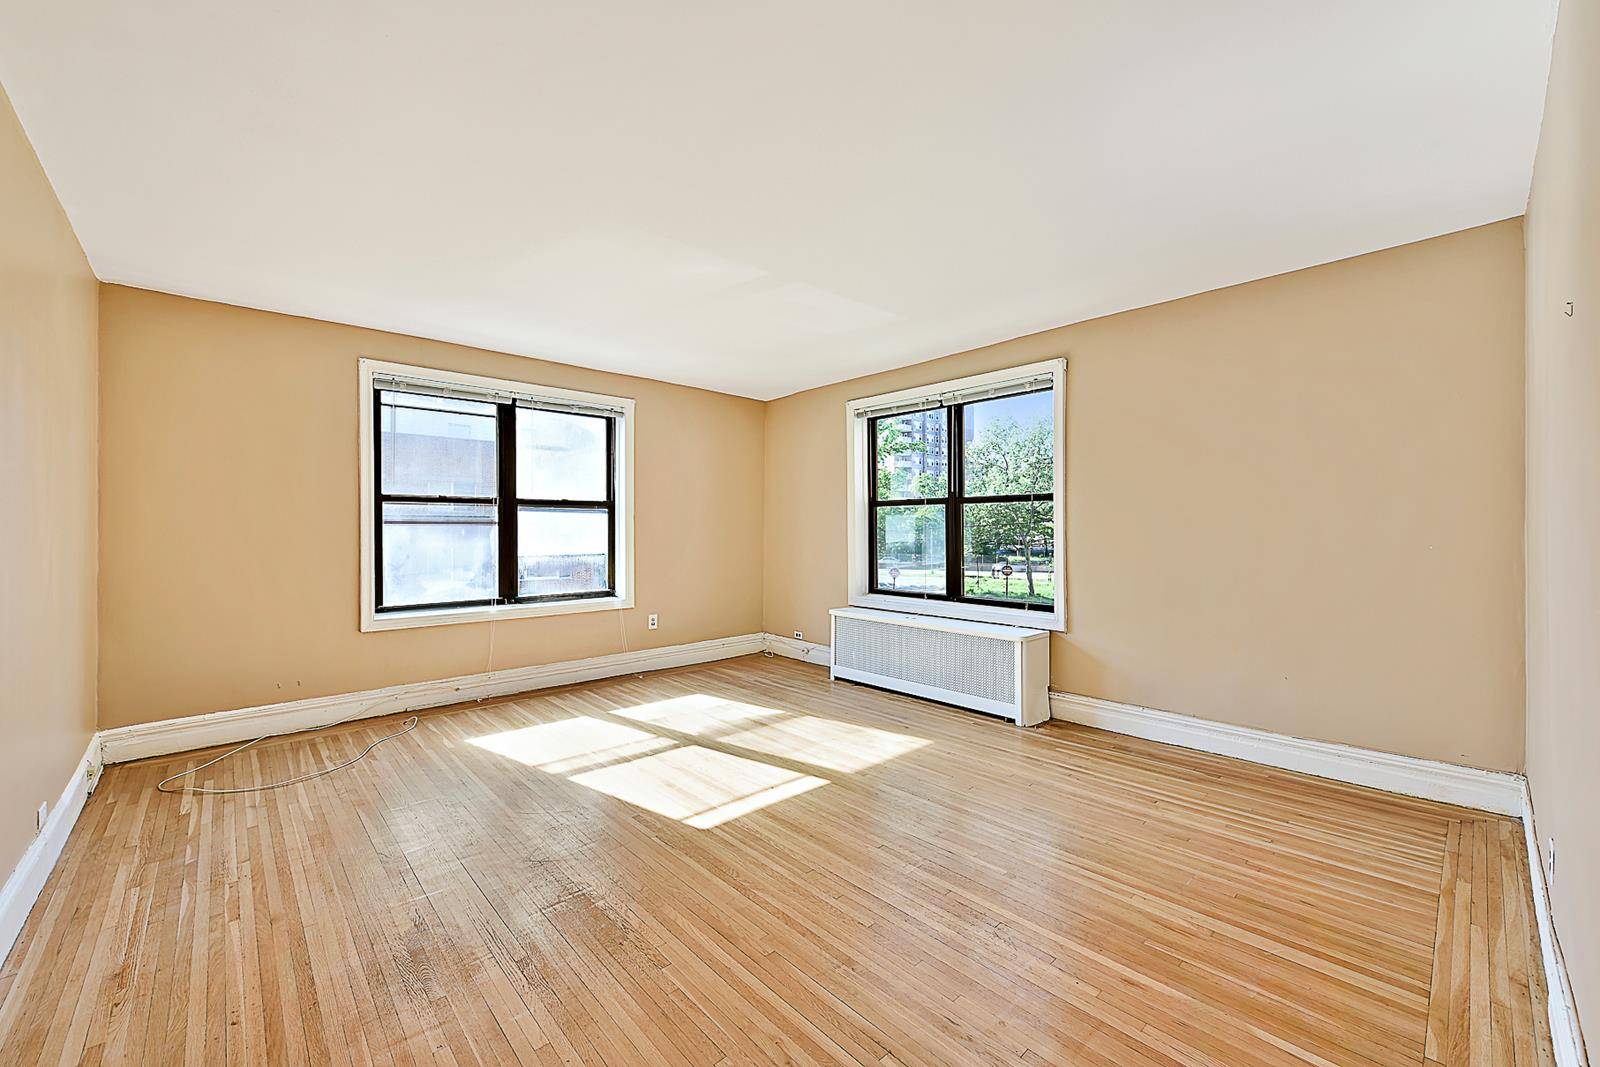 Pre war 2 bedroom, 1 bathroom co op apartment available in the heart of Riverdale.